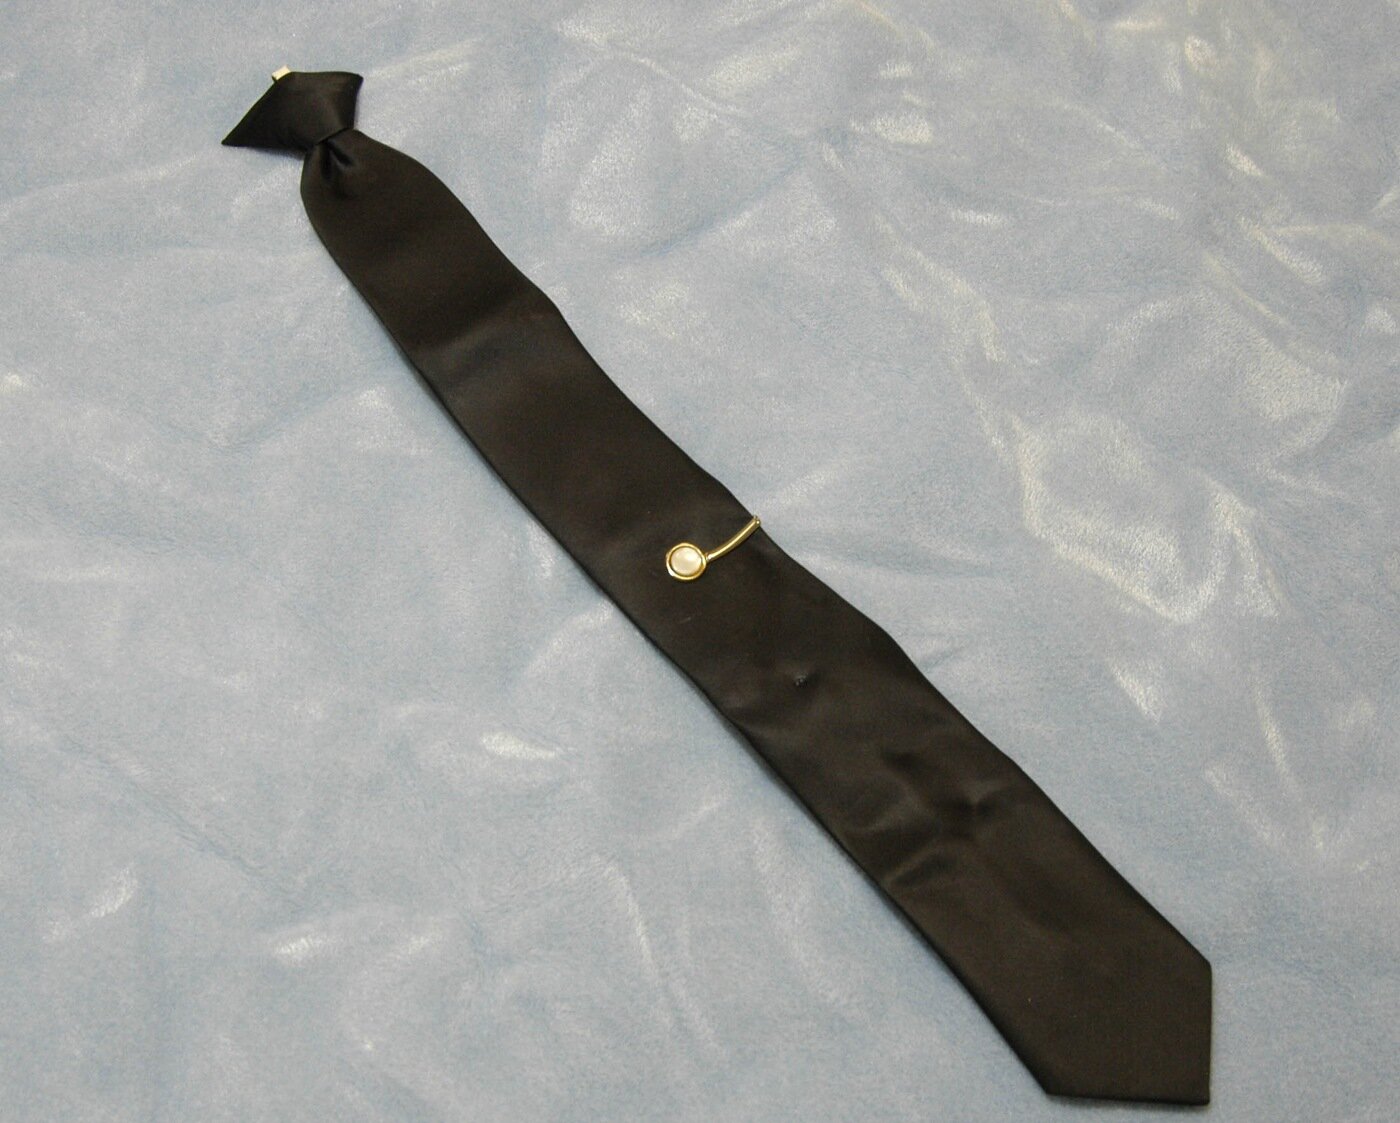  The black J.C. Penney clip-on tie and Mother of Pearl tie clip Cooper wore during the skyjacking and removed before jumping. The FBI later recovered a DNA sample from it. 